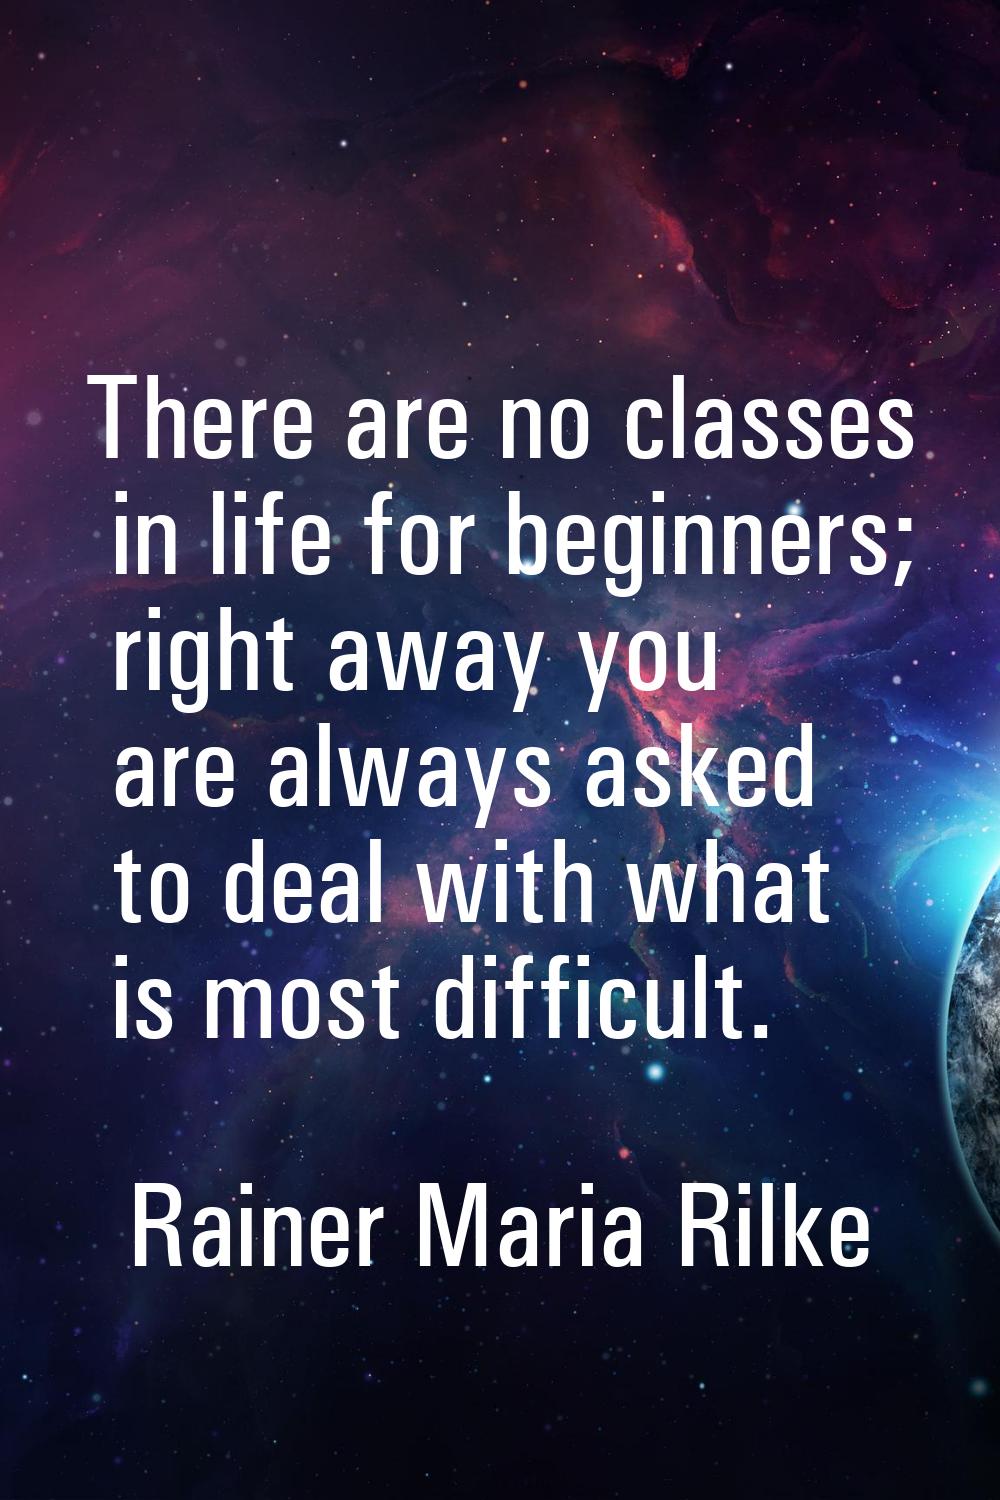 There are no classes in life for beginners; right away you are always asked to deal with what is mo